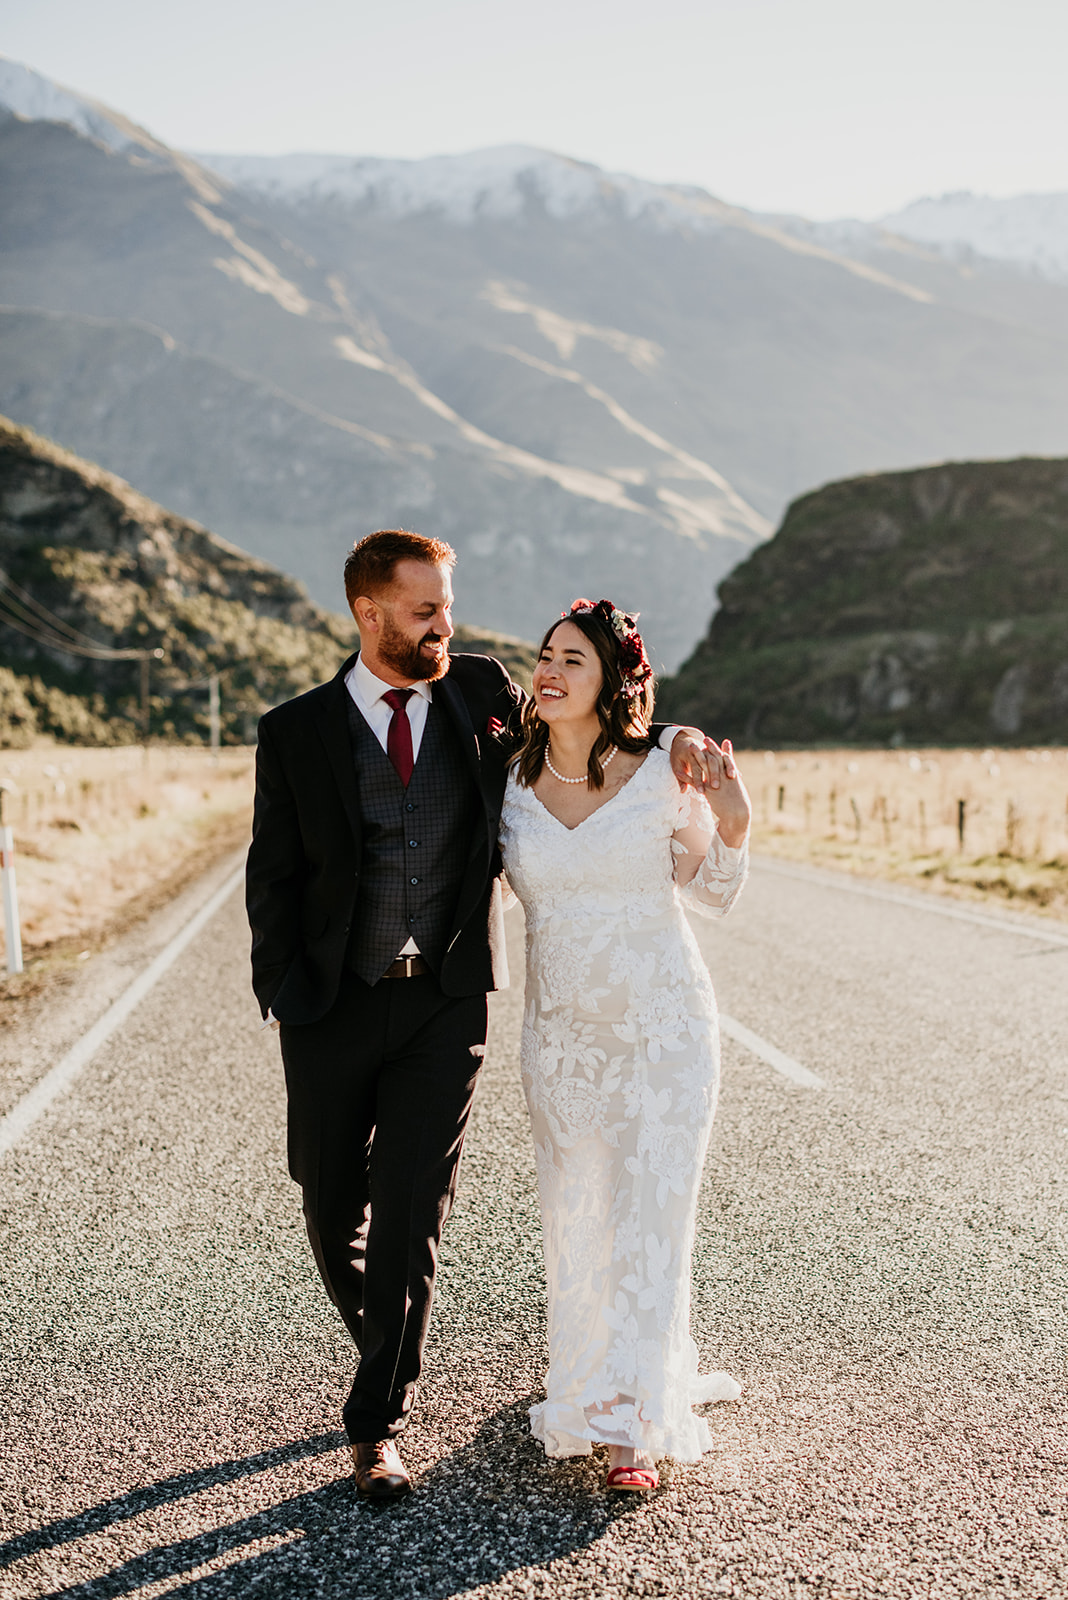 Couple in their wedding outfits holding each other walking down the middle of a desserted road looking into each others eyes